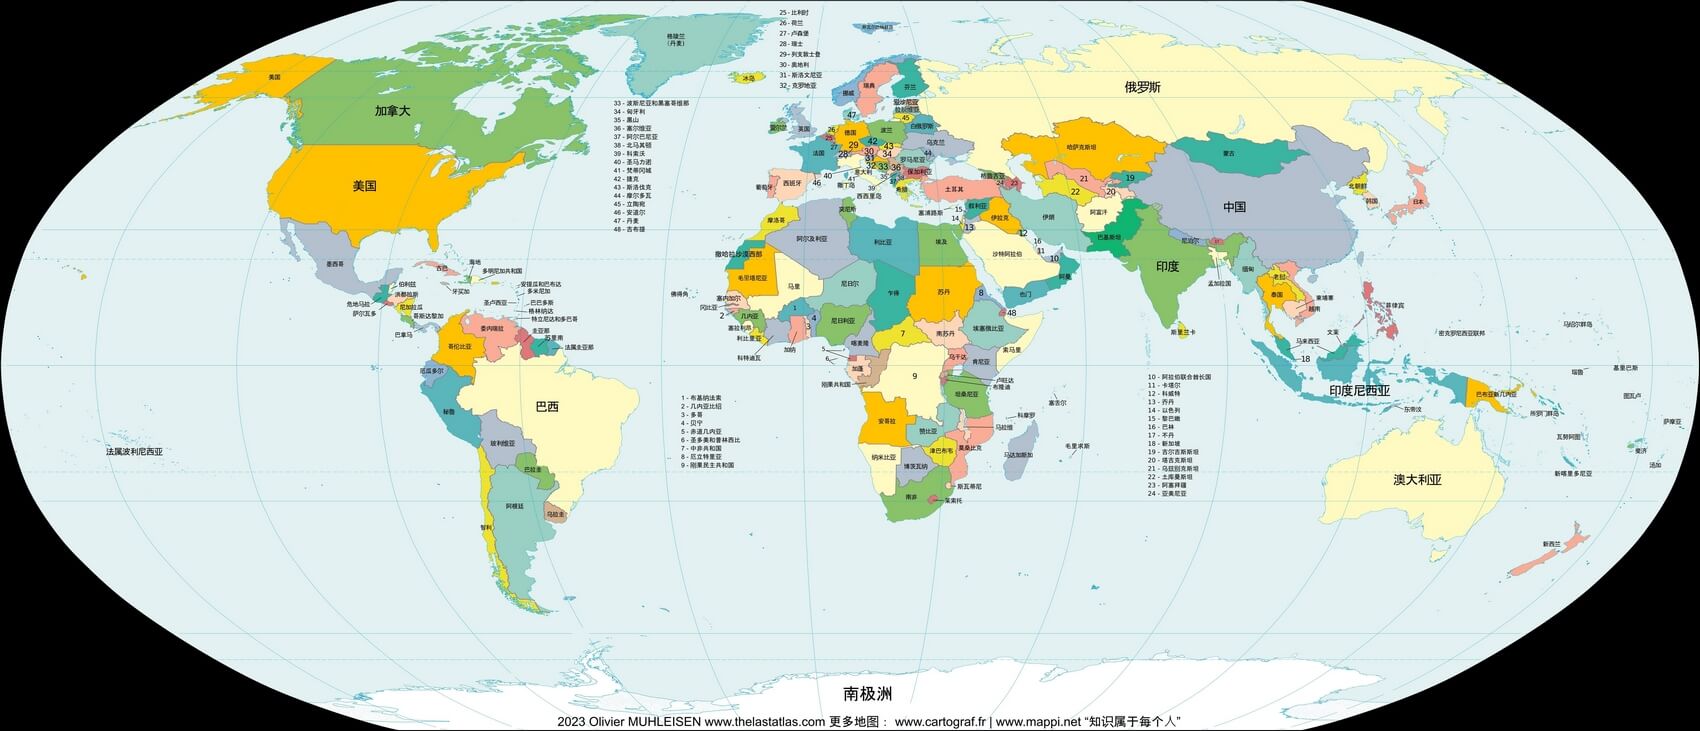 World map countries in Chinese